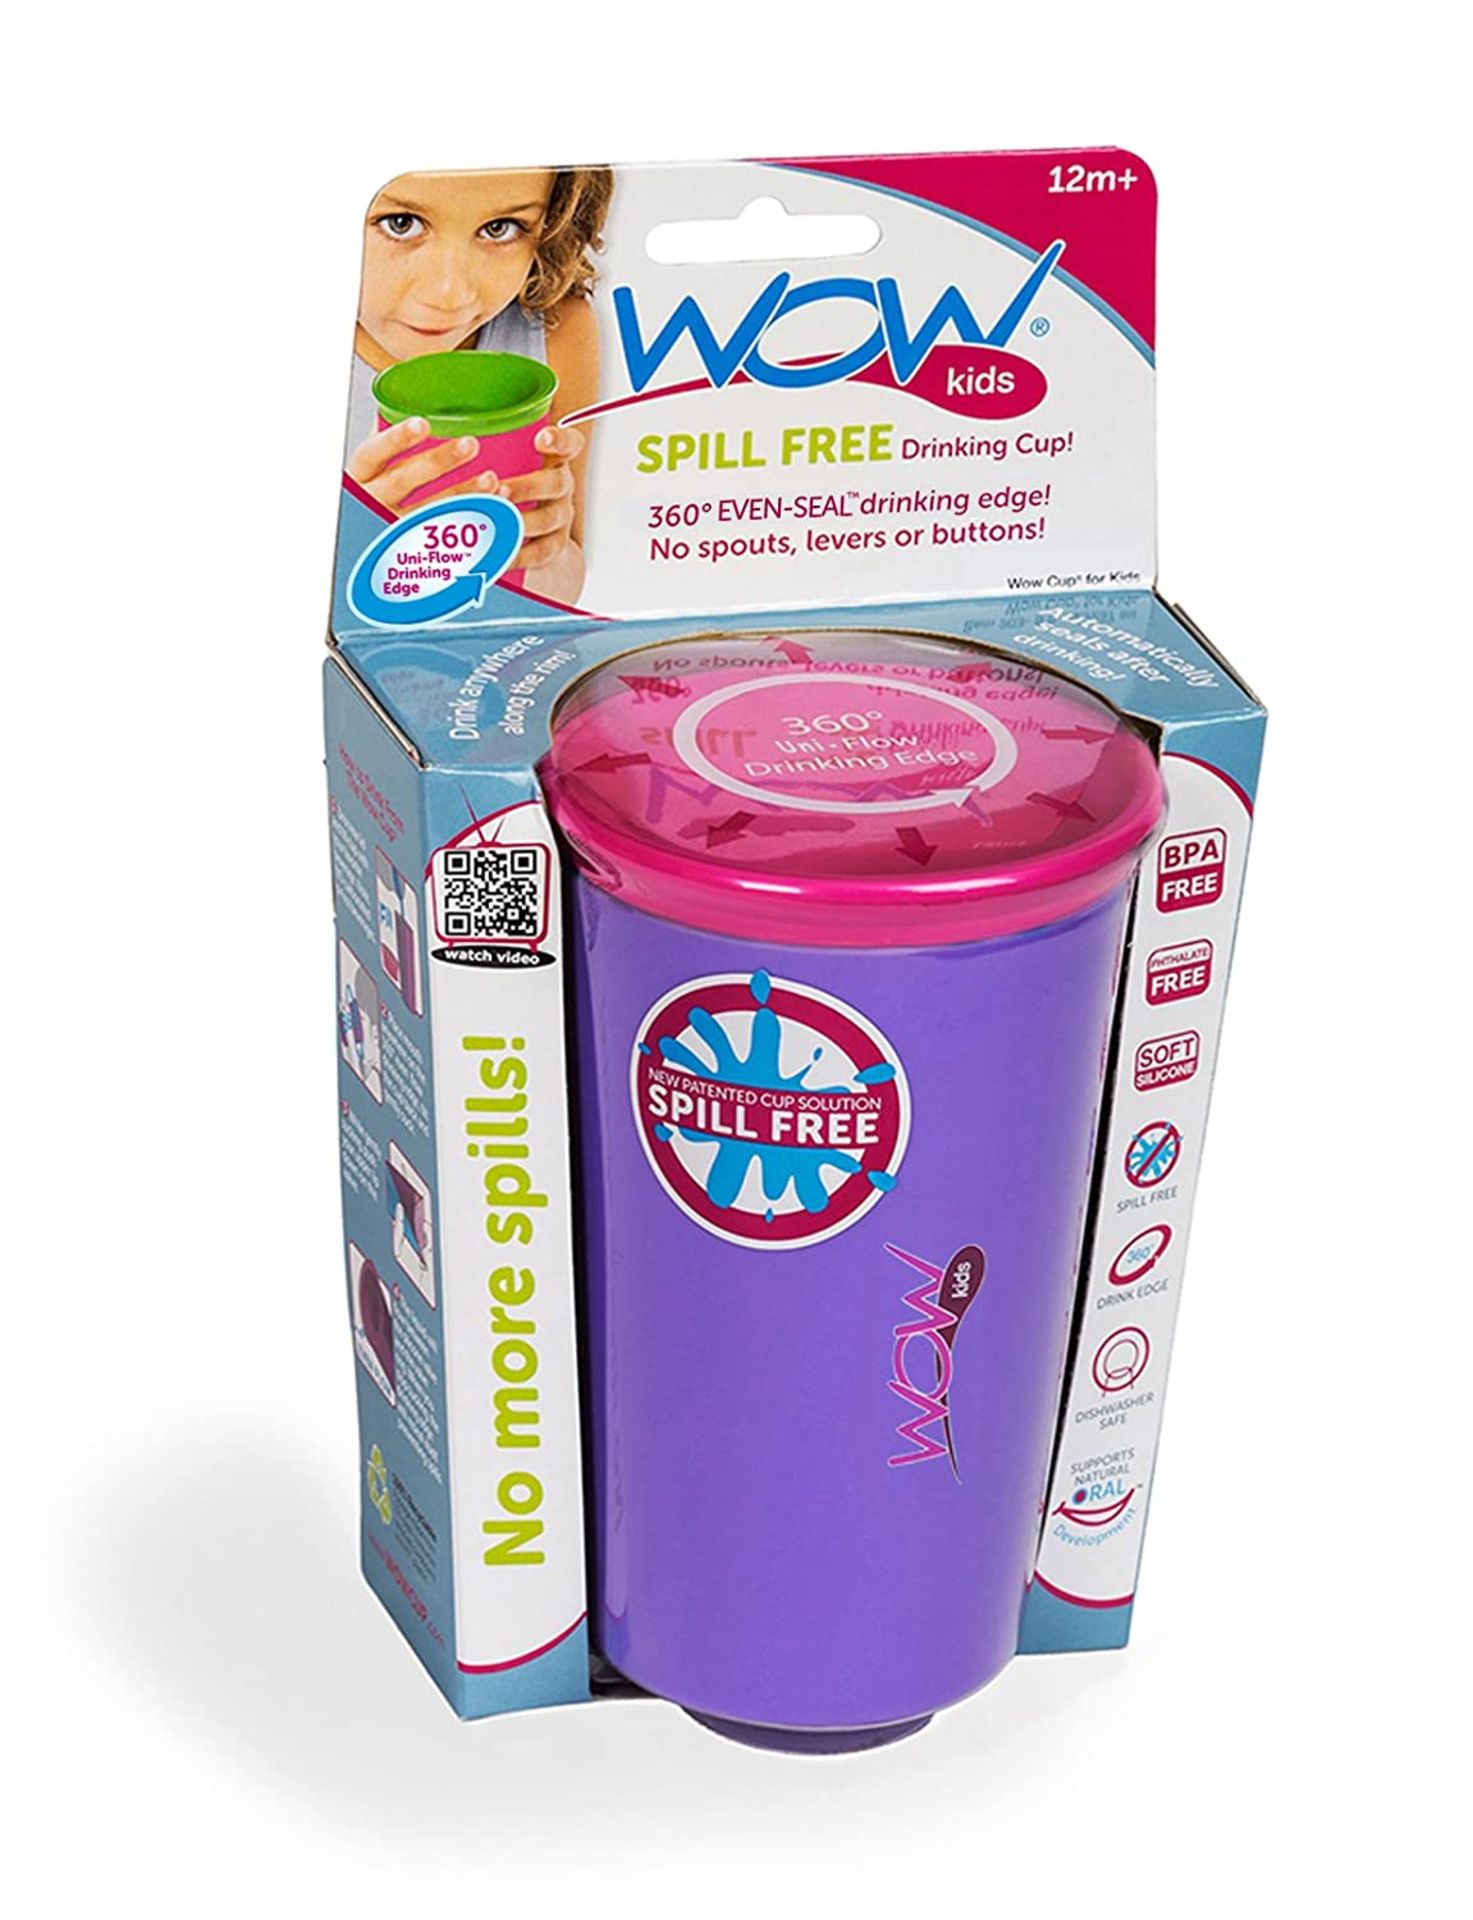 240 X SPILL FREE DRINKING CUP FOR KIDS -WOW INNOVATIVE DIFFERENT COLORS - RRP £1680 - Bild 5 aus 8